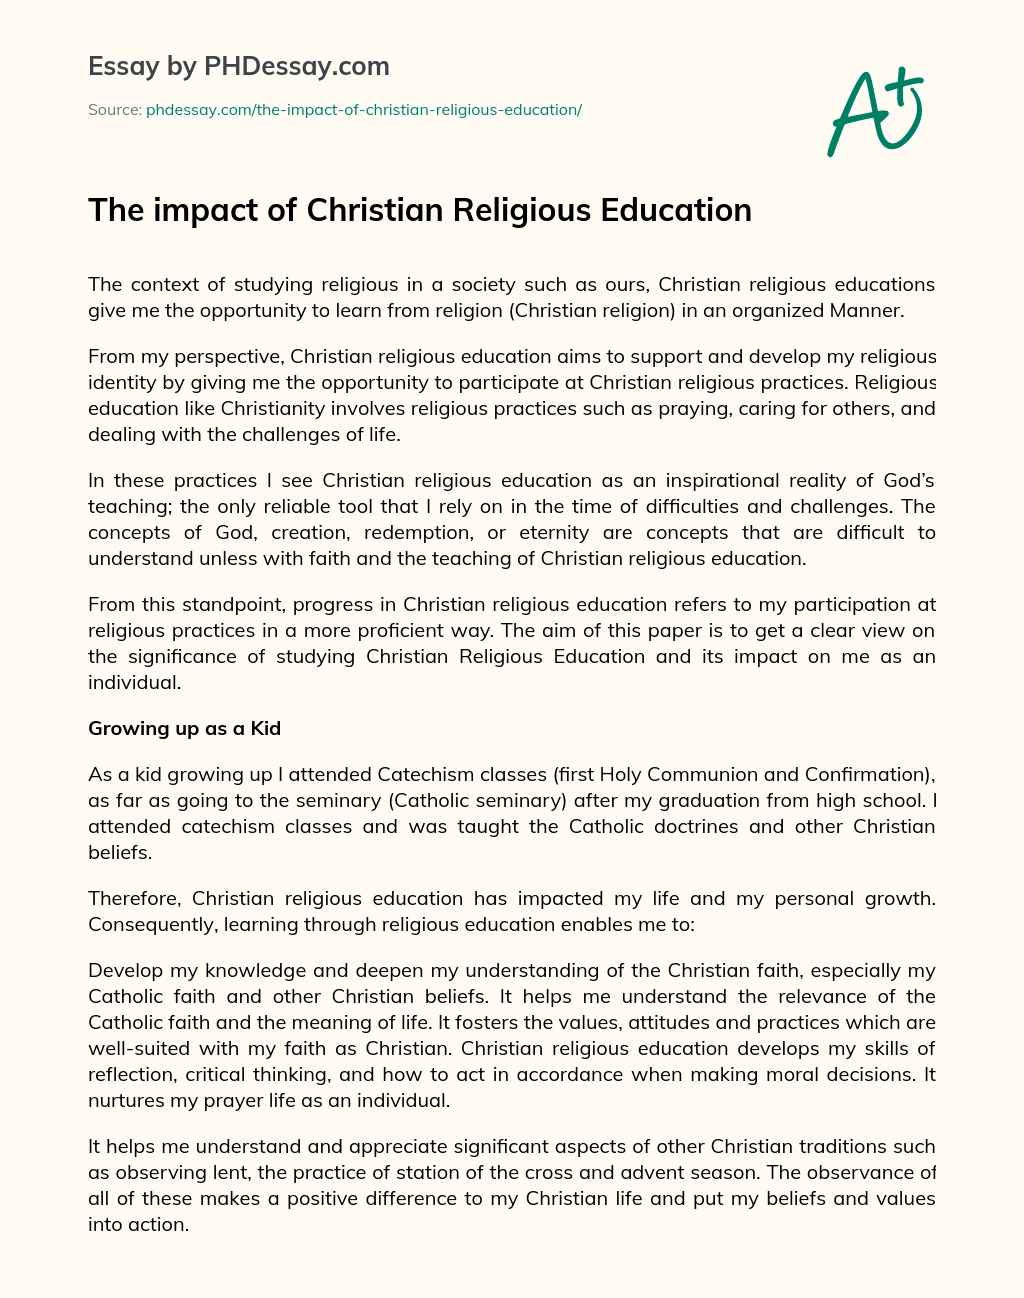 The impact of Christian Religious Education essay